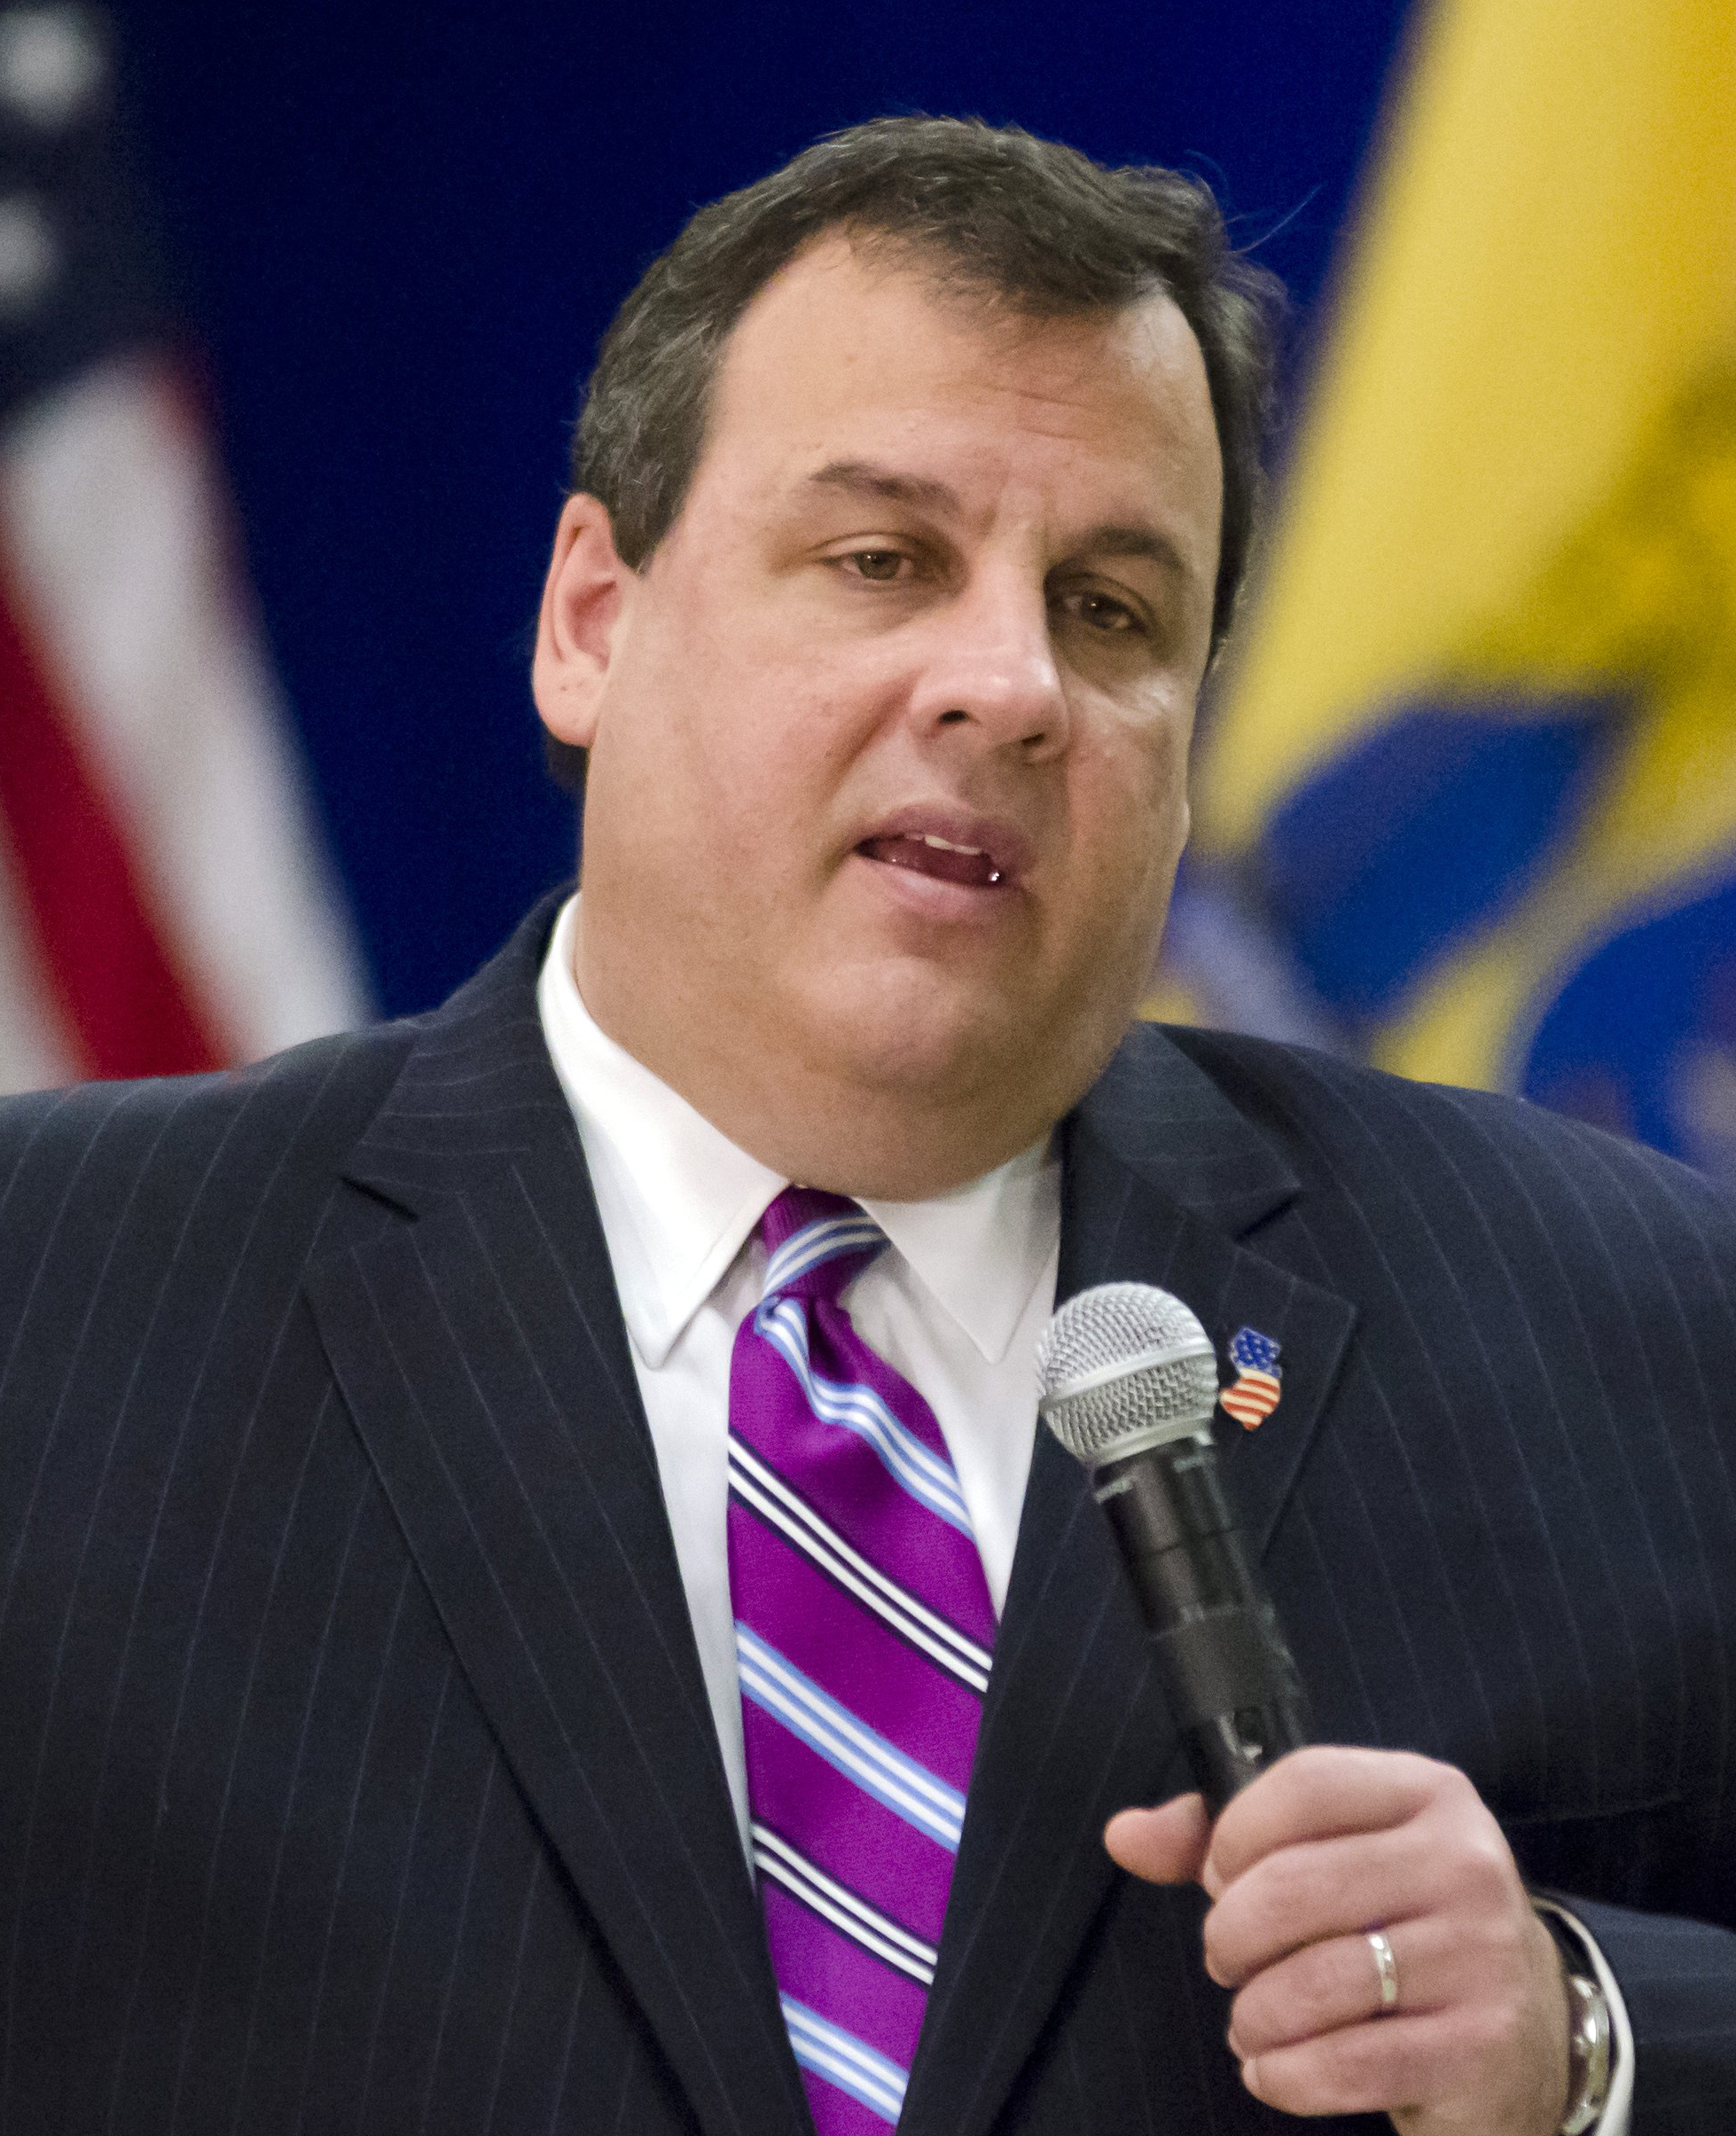 John Bury On New Jersey’s Pay-to-Play Allegations: Let’s Move On To The Real Problems